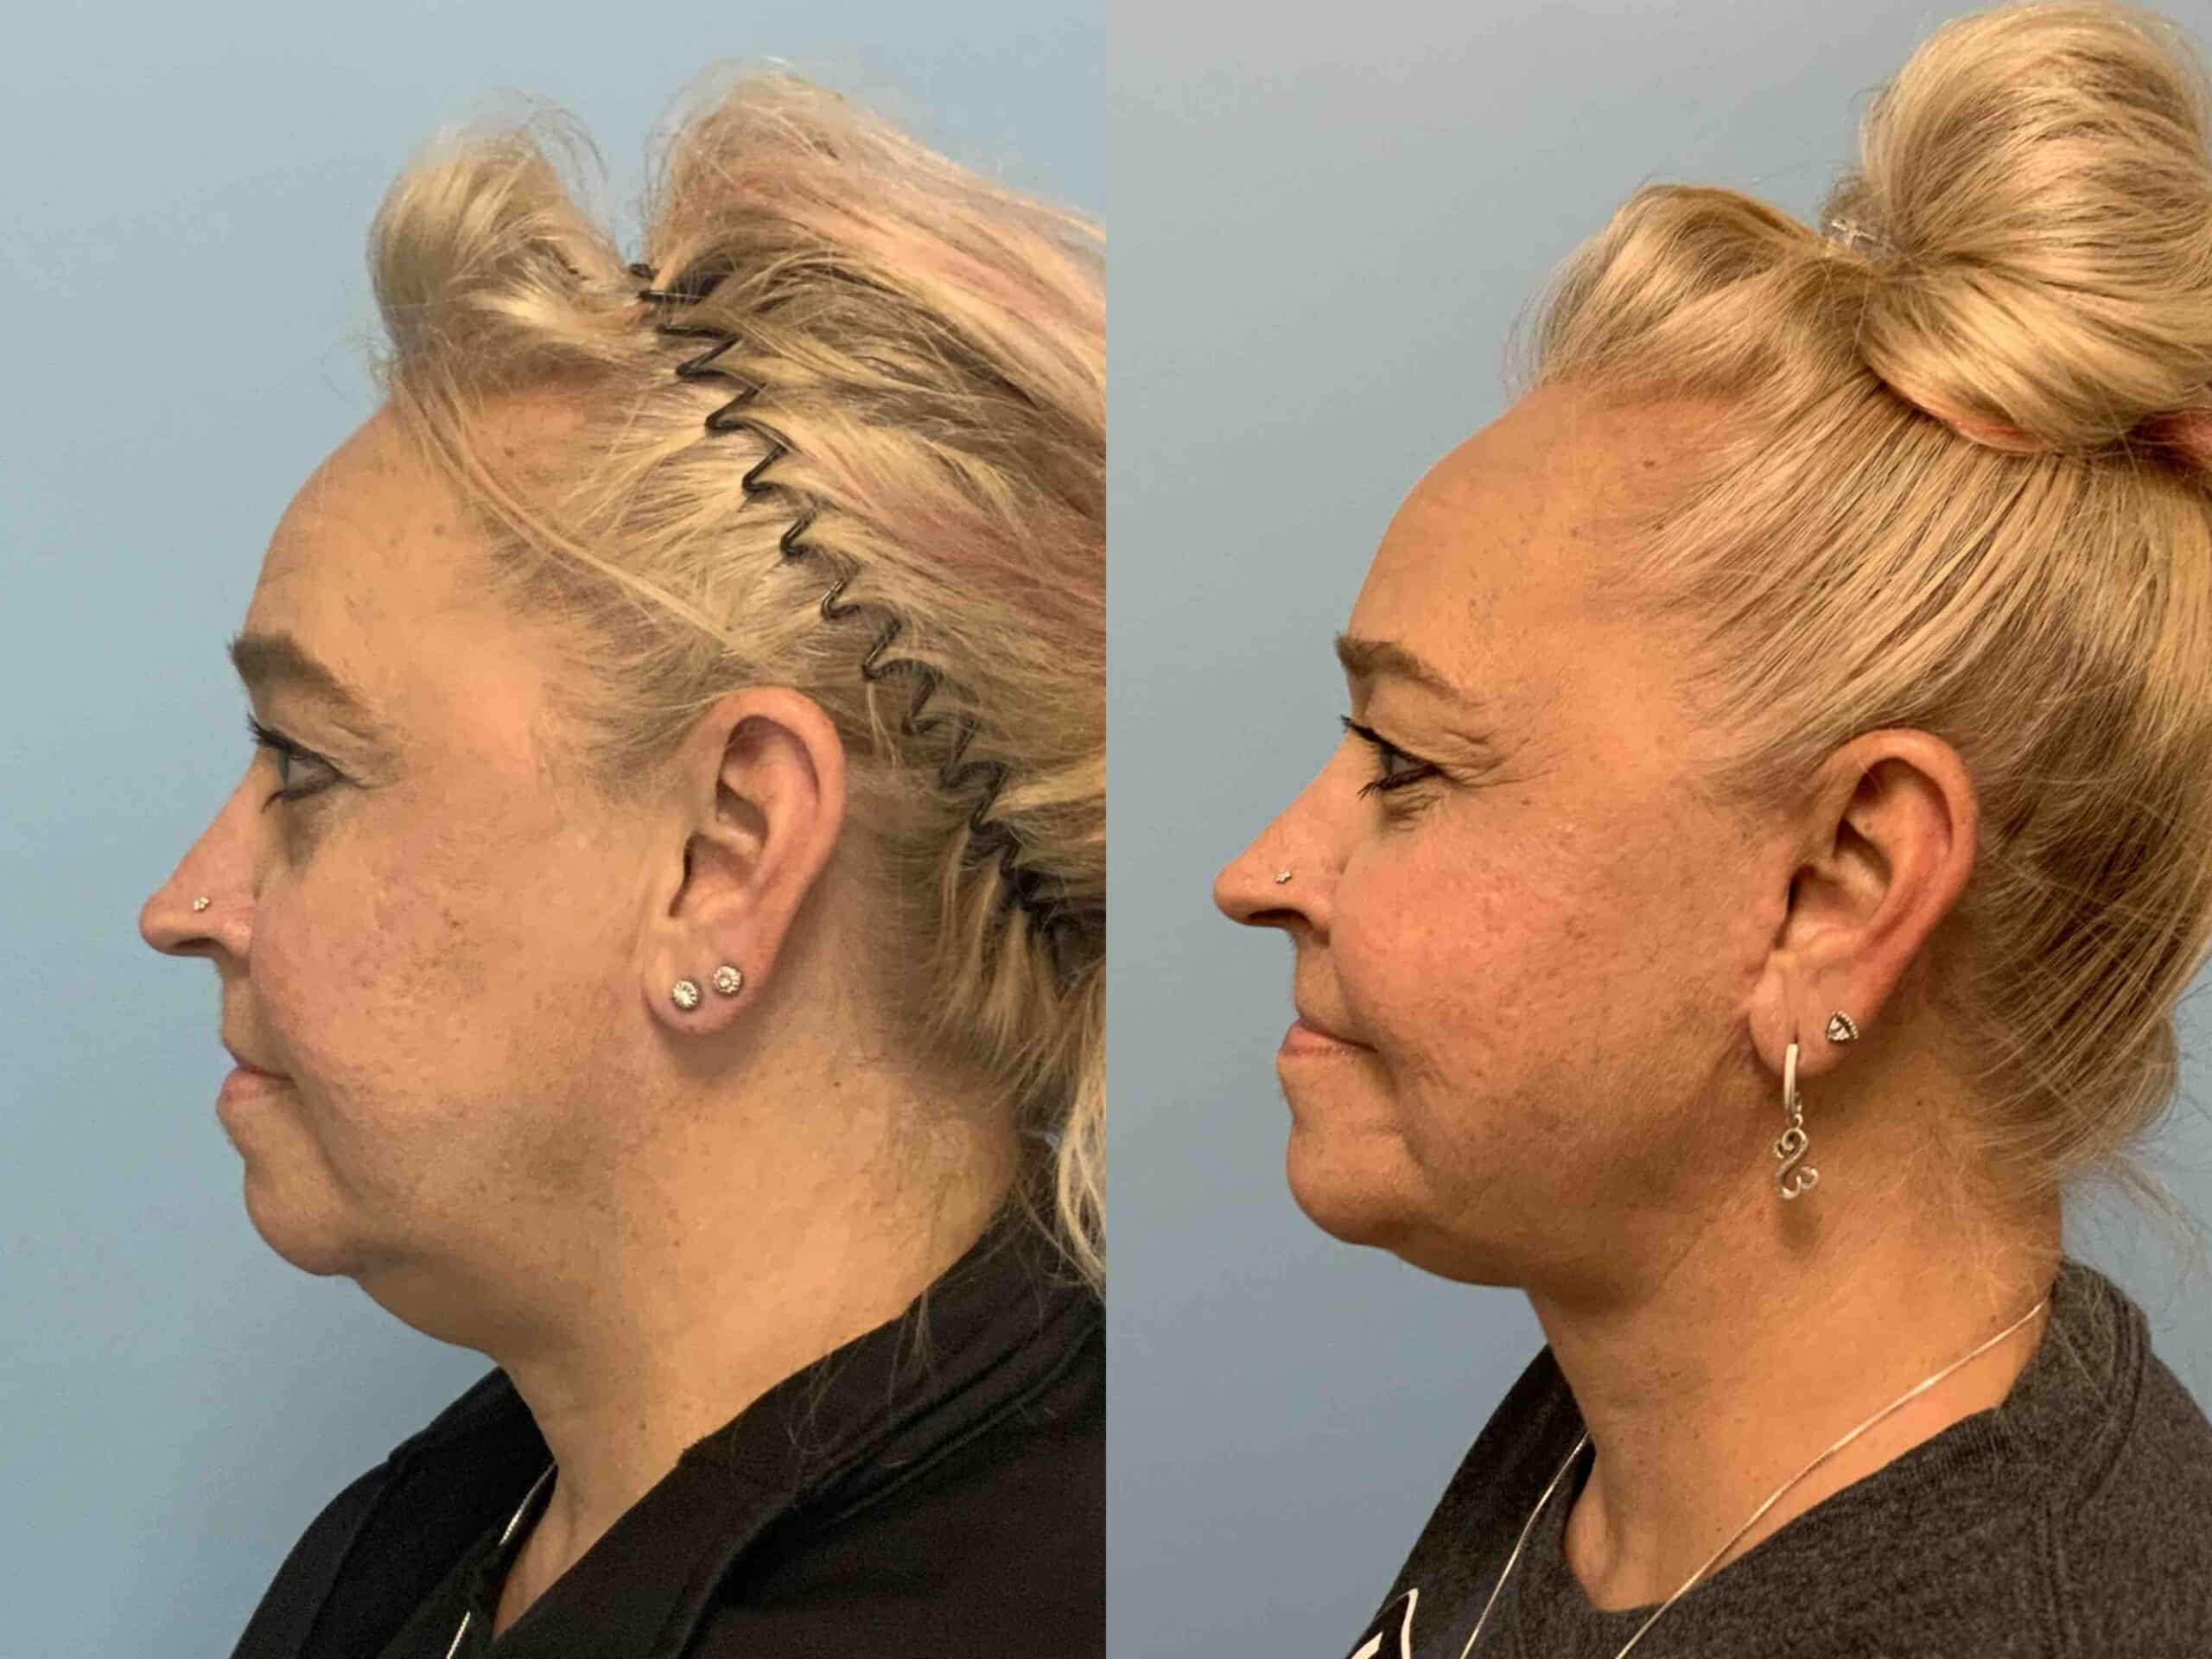 Before and after, patient 1 yr post op from Neck Lift, VASER and Renuvion Neck procedures performed by Dr. Paul Vanek